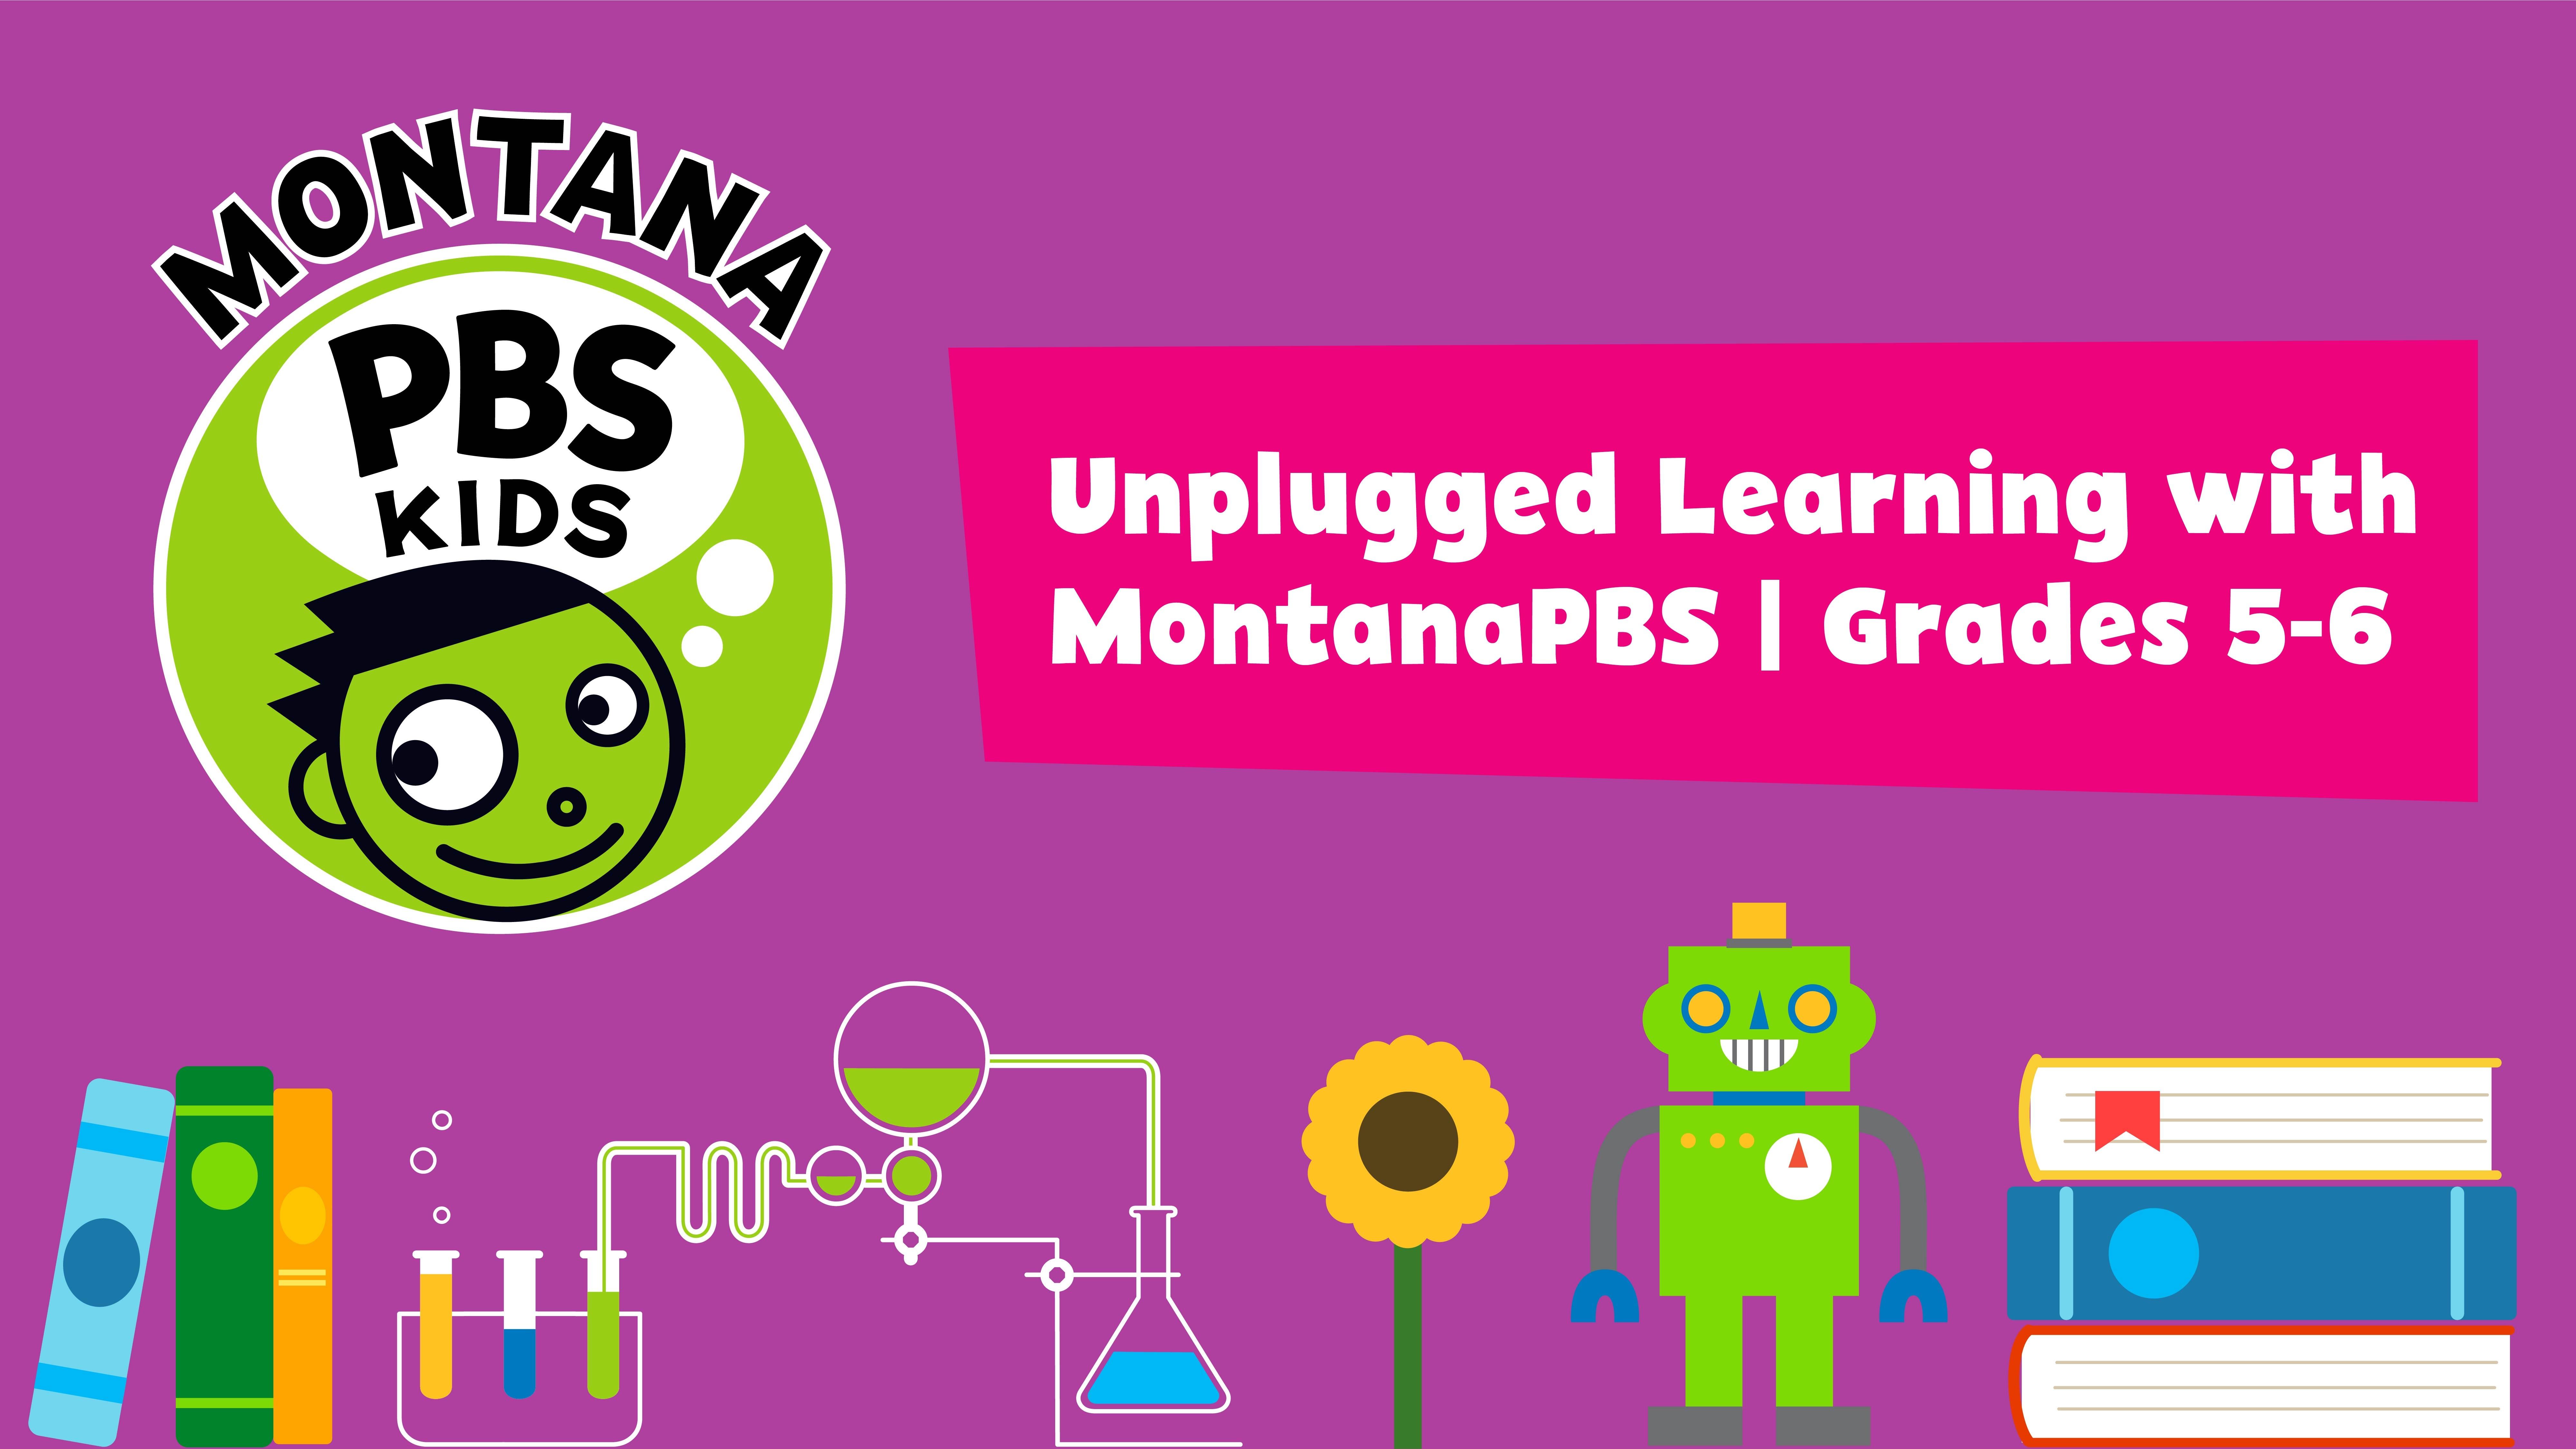 Unplugged Learning with MontanaPBS Grades 5-6